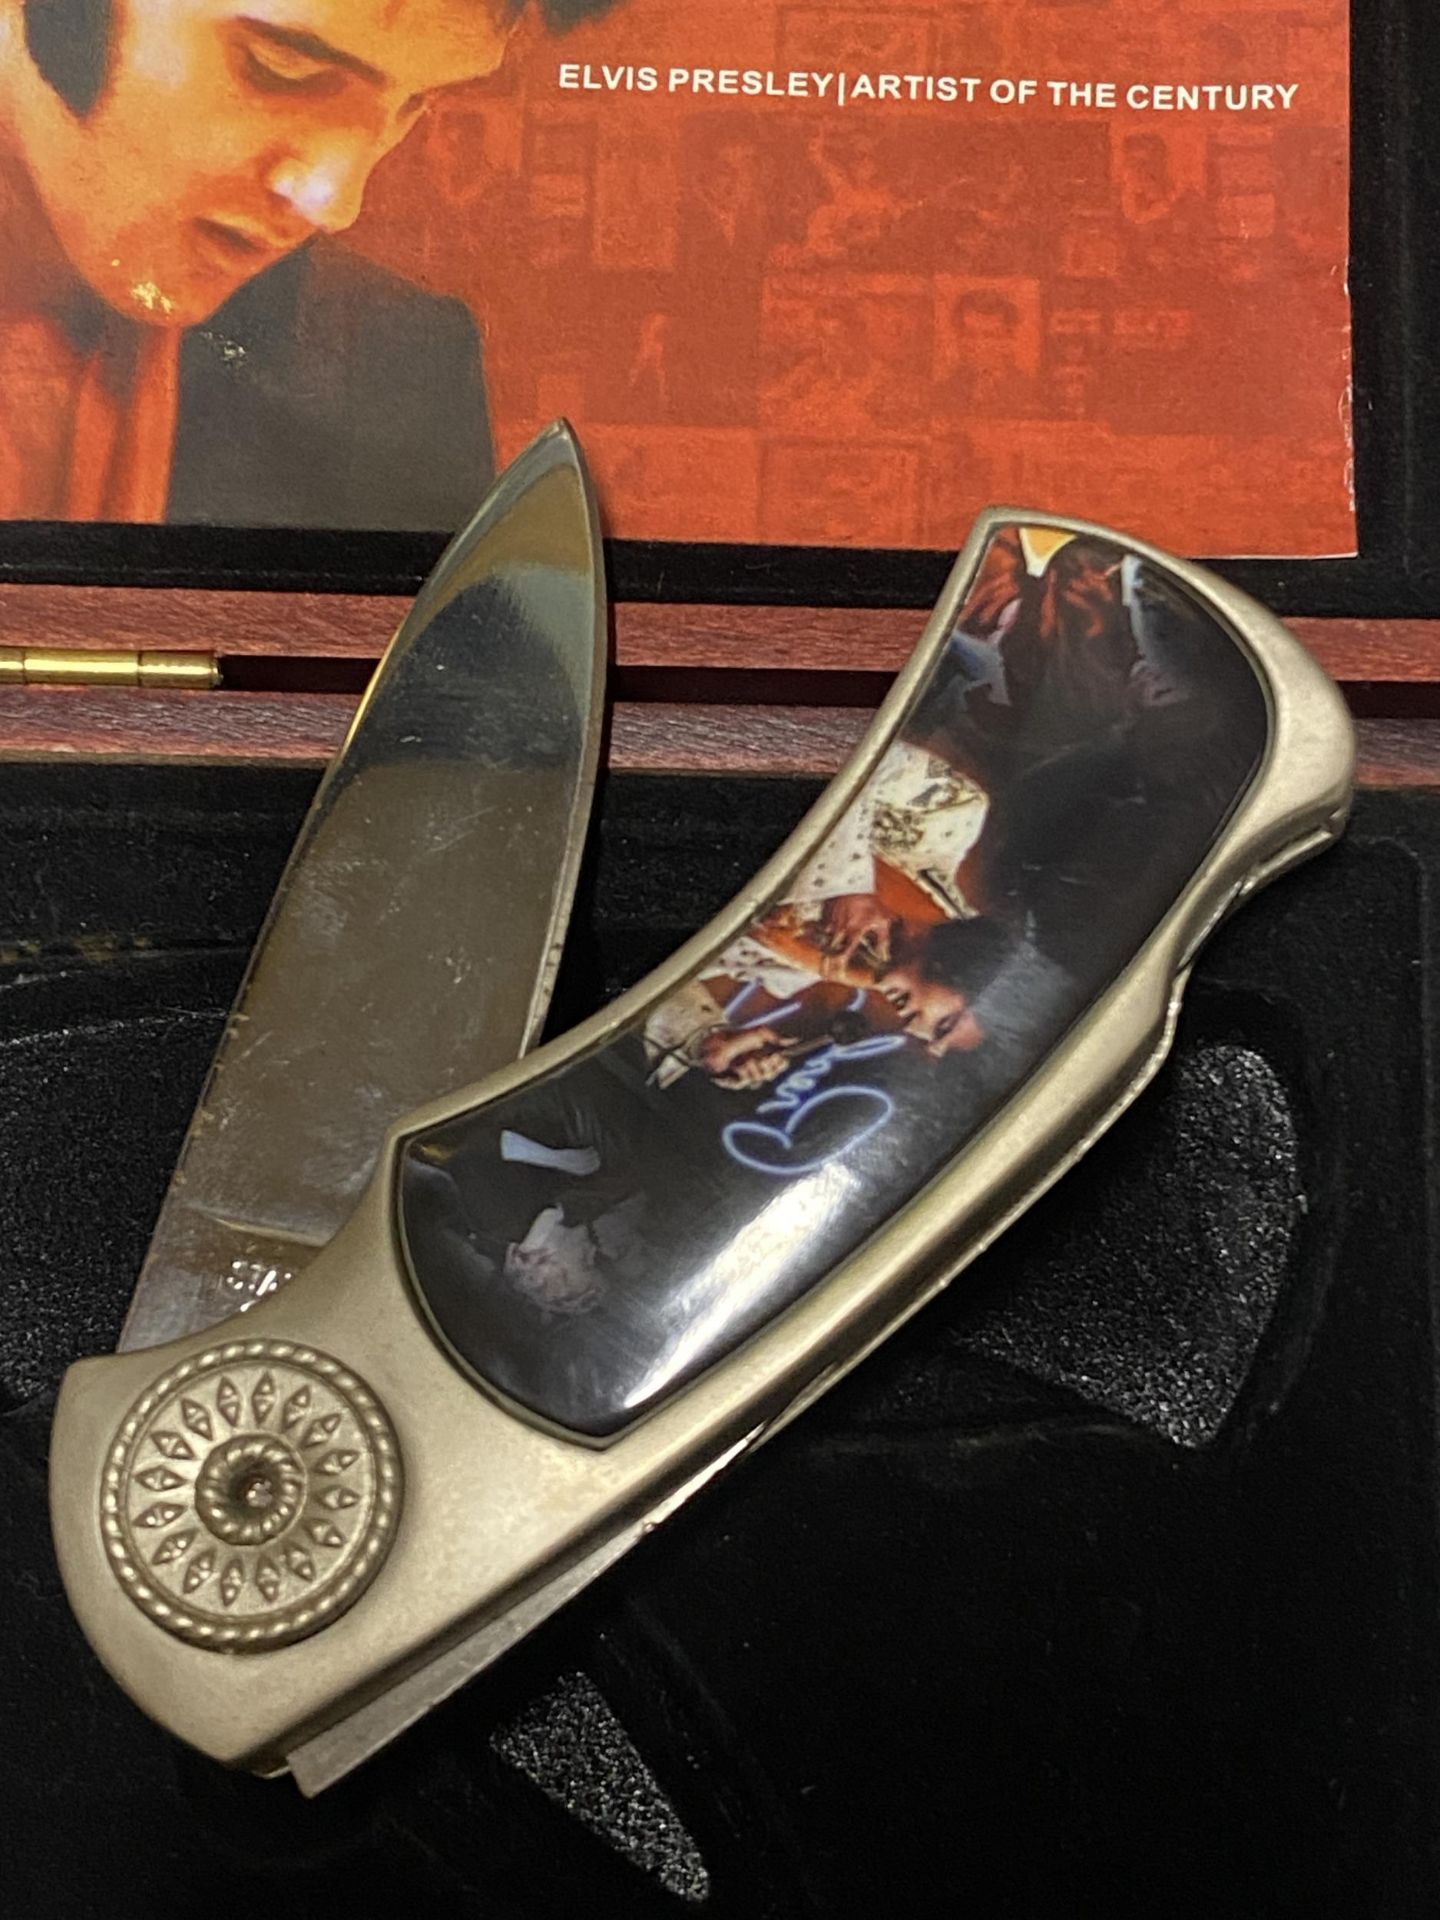 AN ELVIS PRESLEY BOXED COLLECTABLE KNIFE - Image 3 of 4